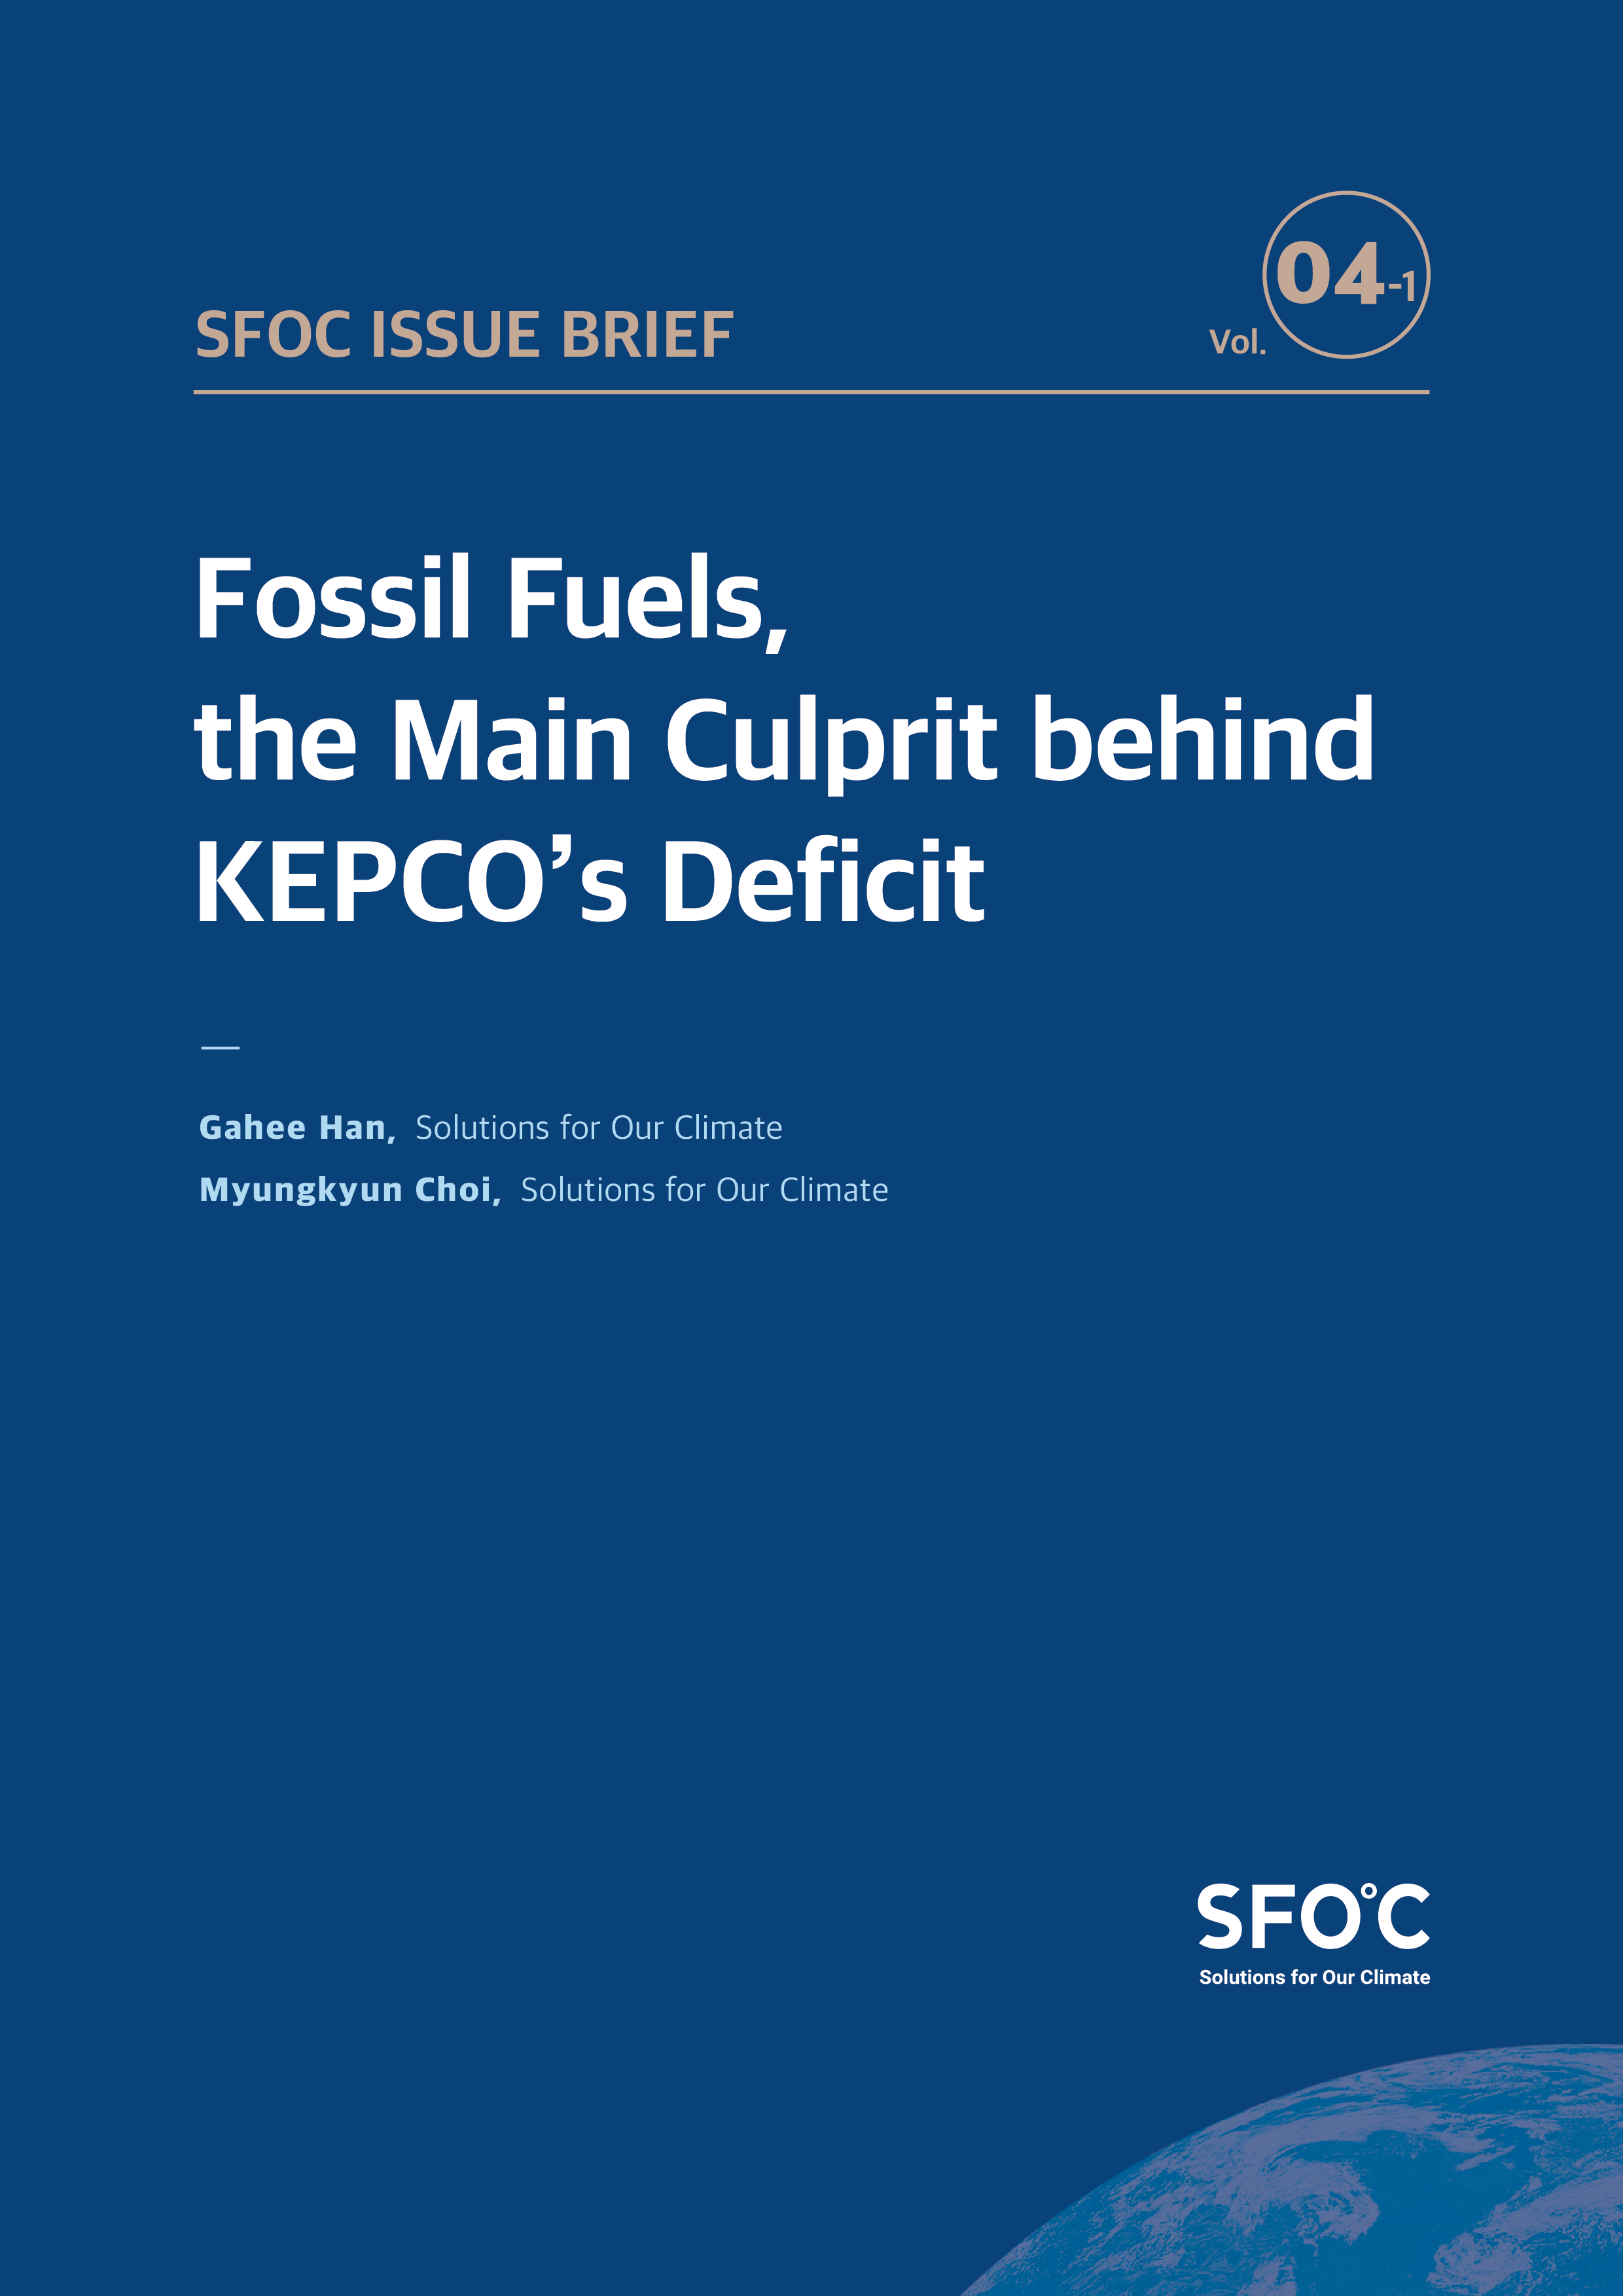 [ISSUE BRIEF] Fossil Fuels, the Main Culprit behind KEPCO’s Deficit